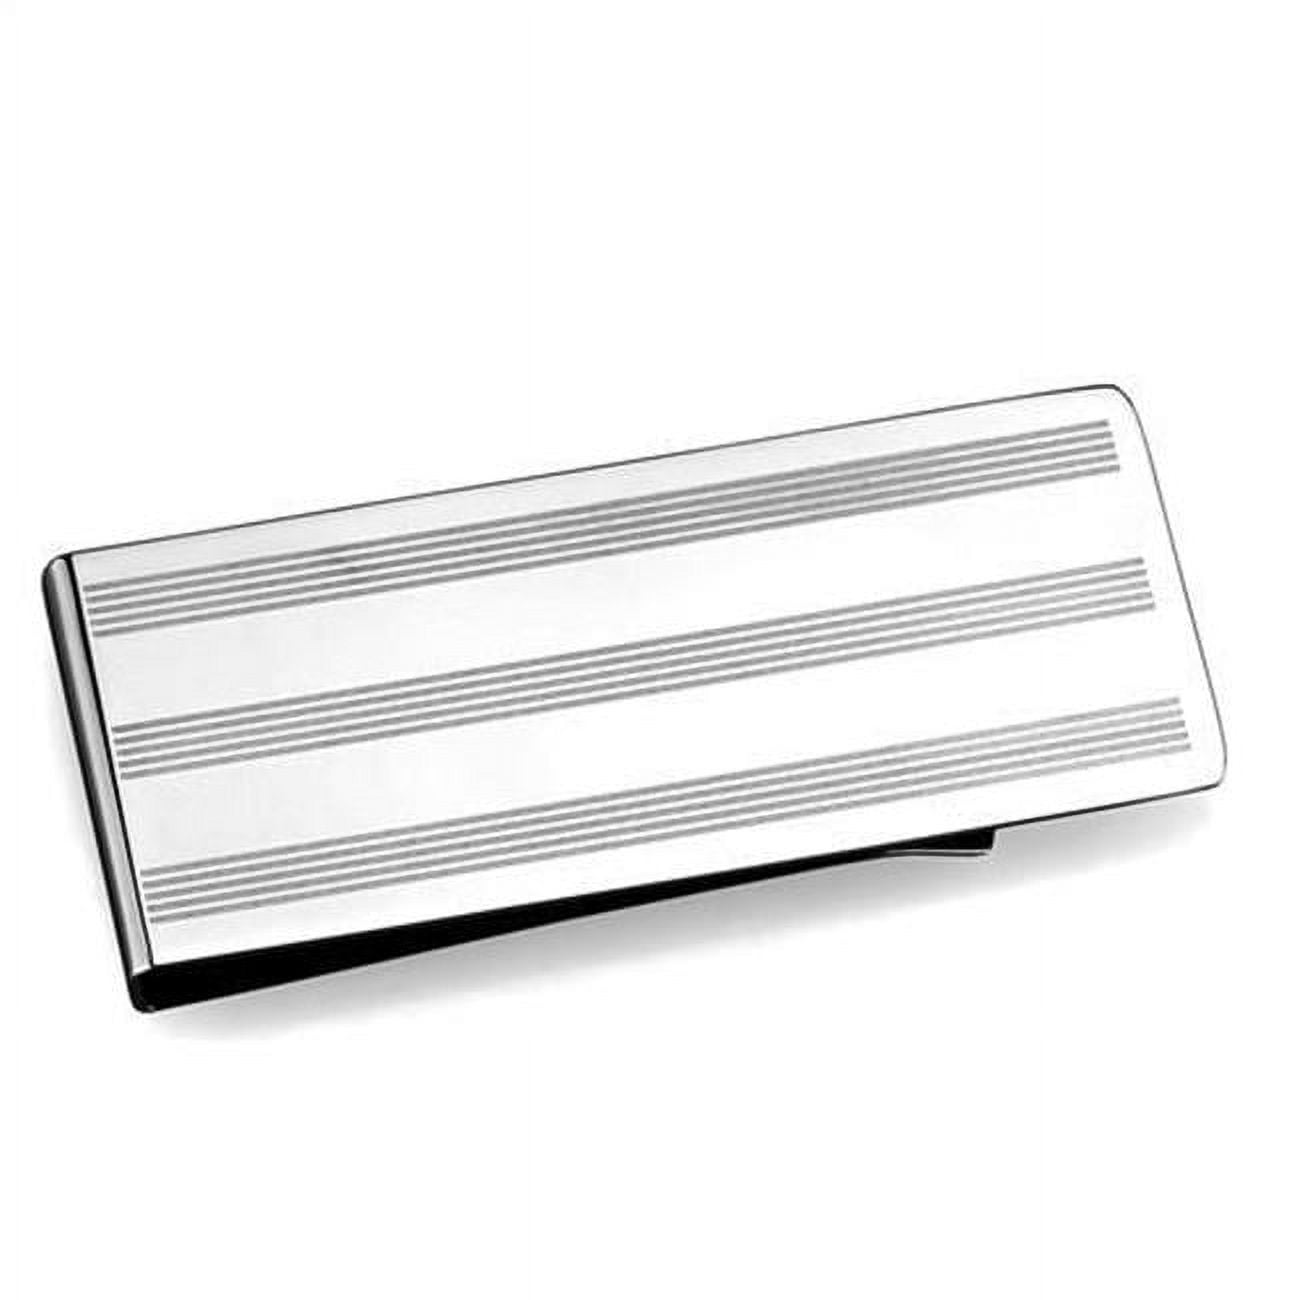 Picture of Alamode TK2081 Men High Polished Stainless Steel Money Clip with No Stone in No Stone